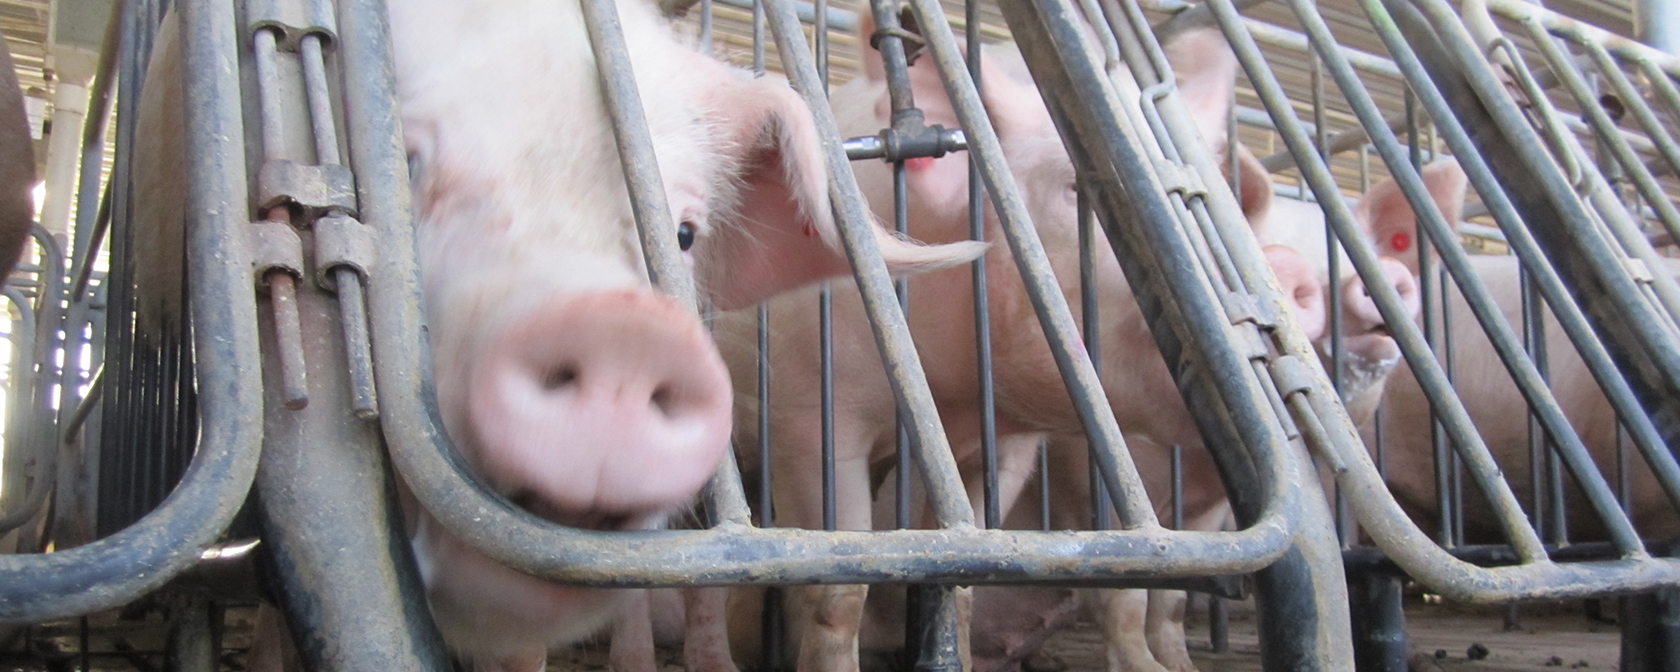 Breaking: Court rules HSUS lawsuit against pork producer Smithfield can proceed